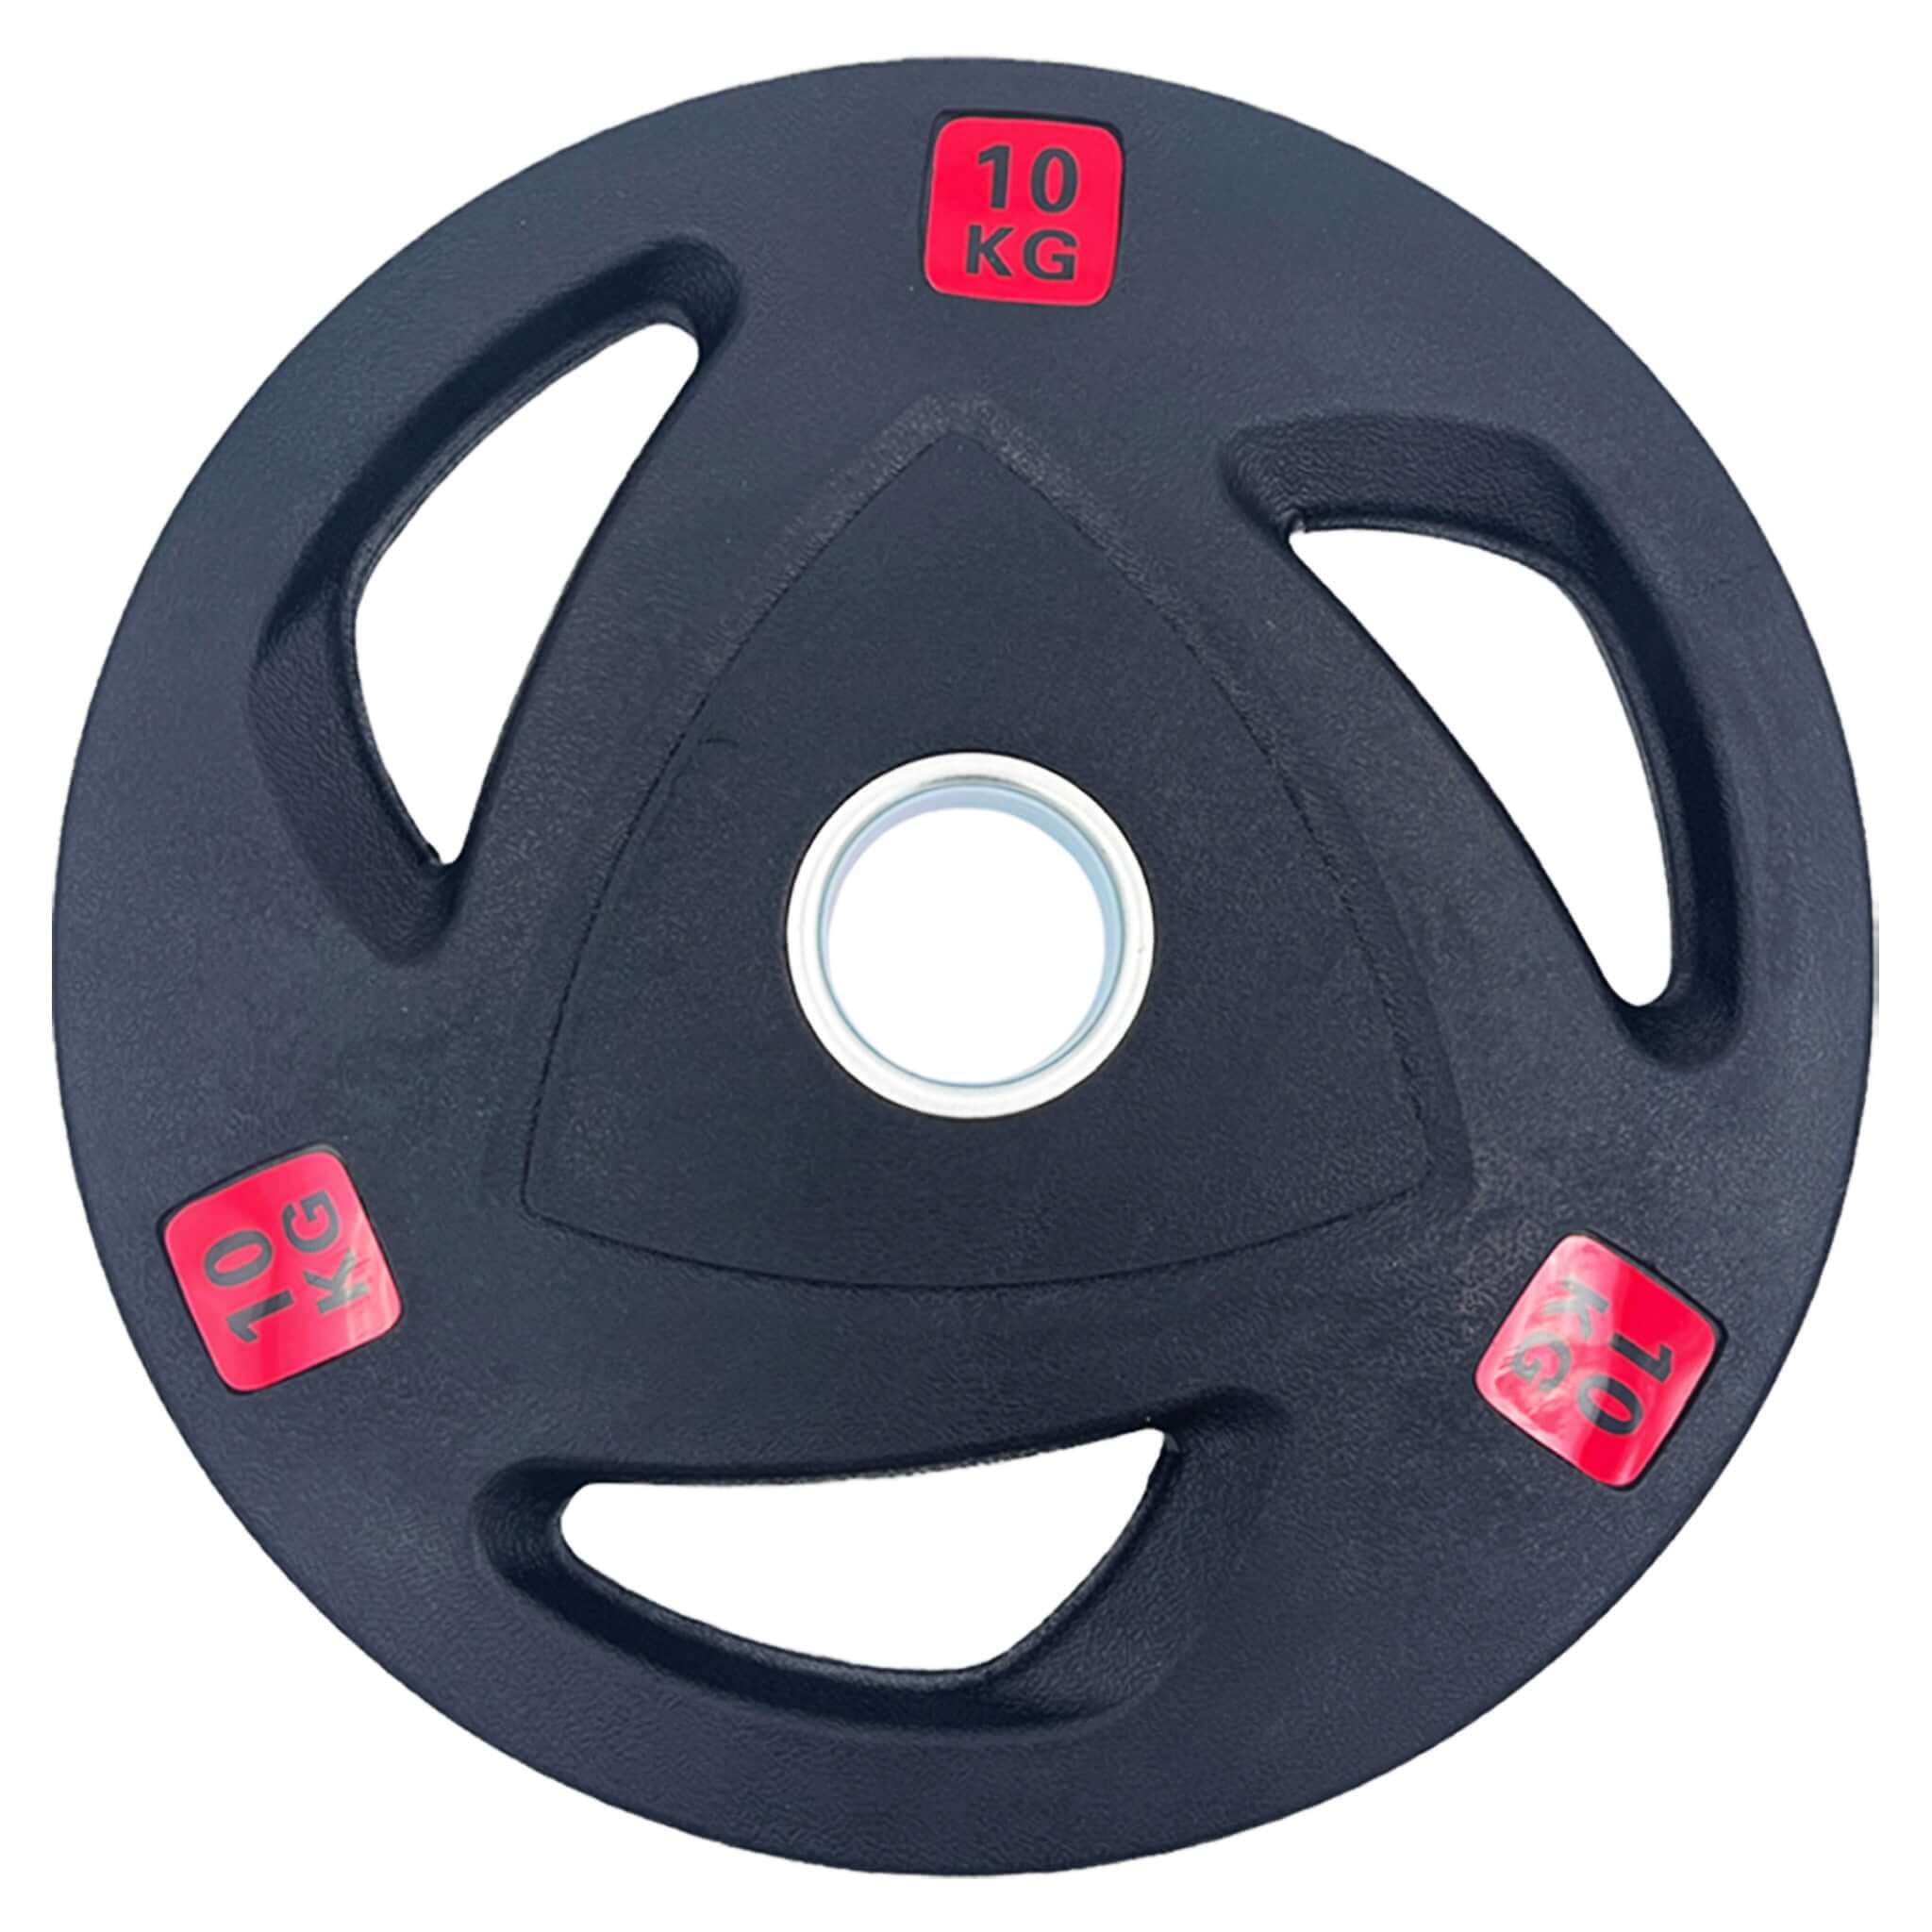 10kg Rubber Tri-grip Weight Plates Type-A (Pairs) | INSOURCE